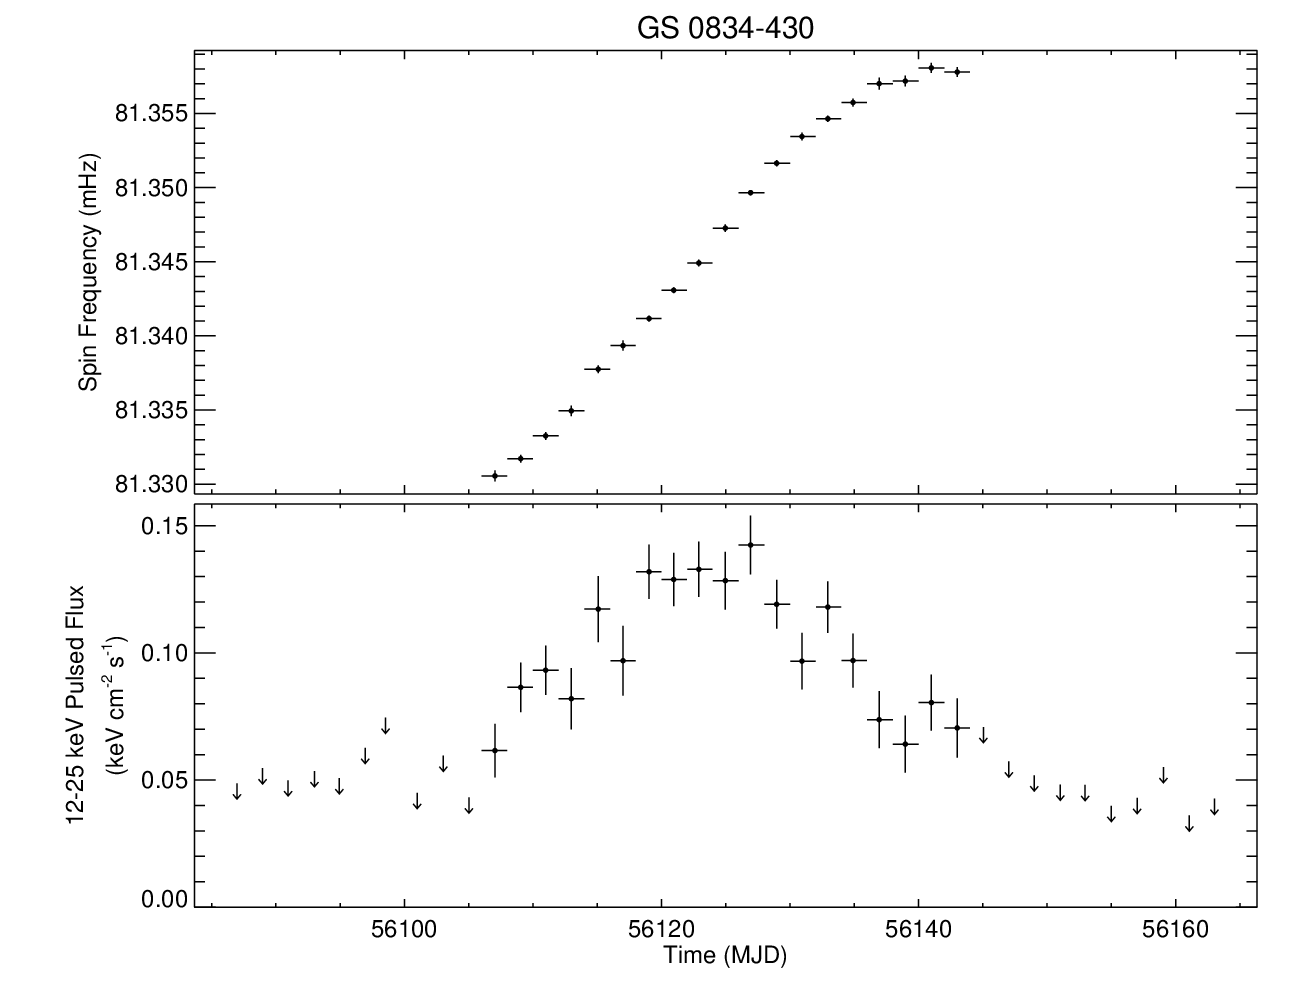 GS 0834-430 Short Frequency History